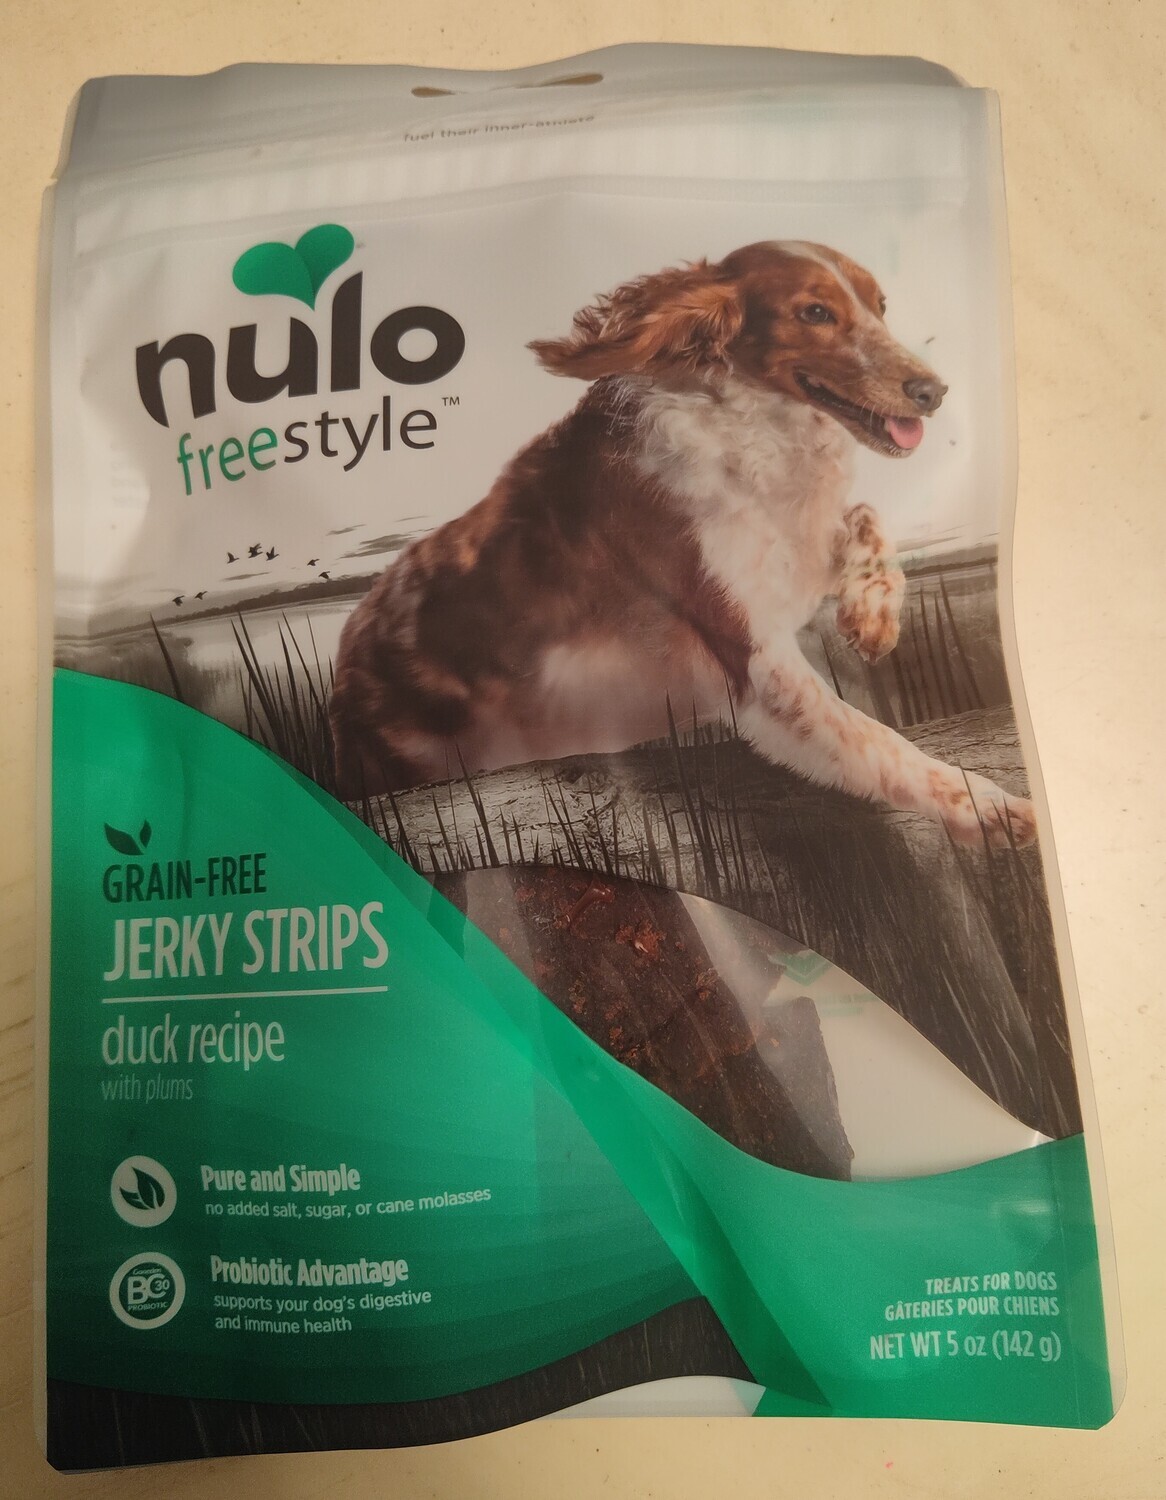 Nulo Freestyle Grain-free Jerky strips-Duck and Plum flavor